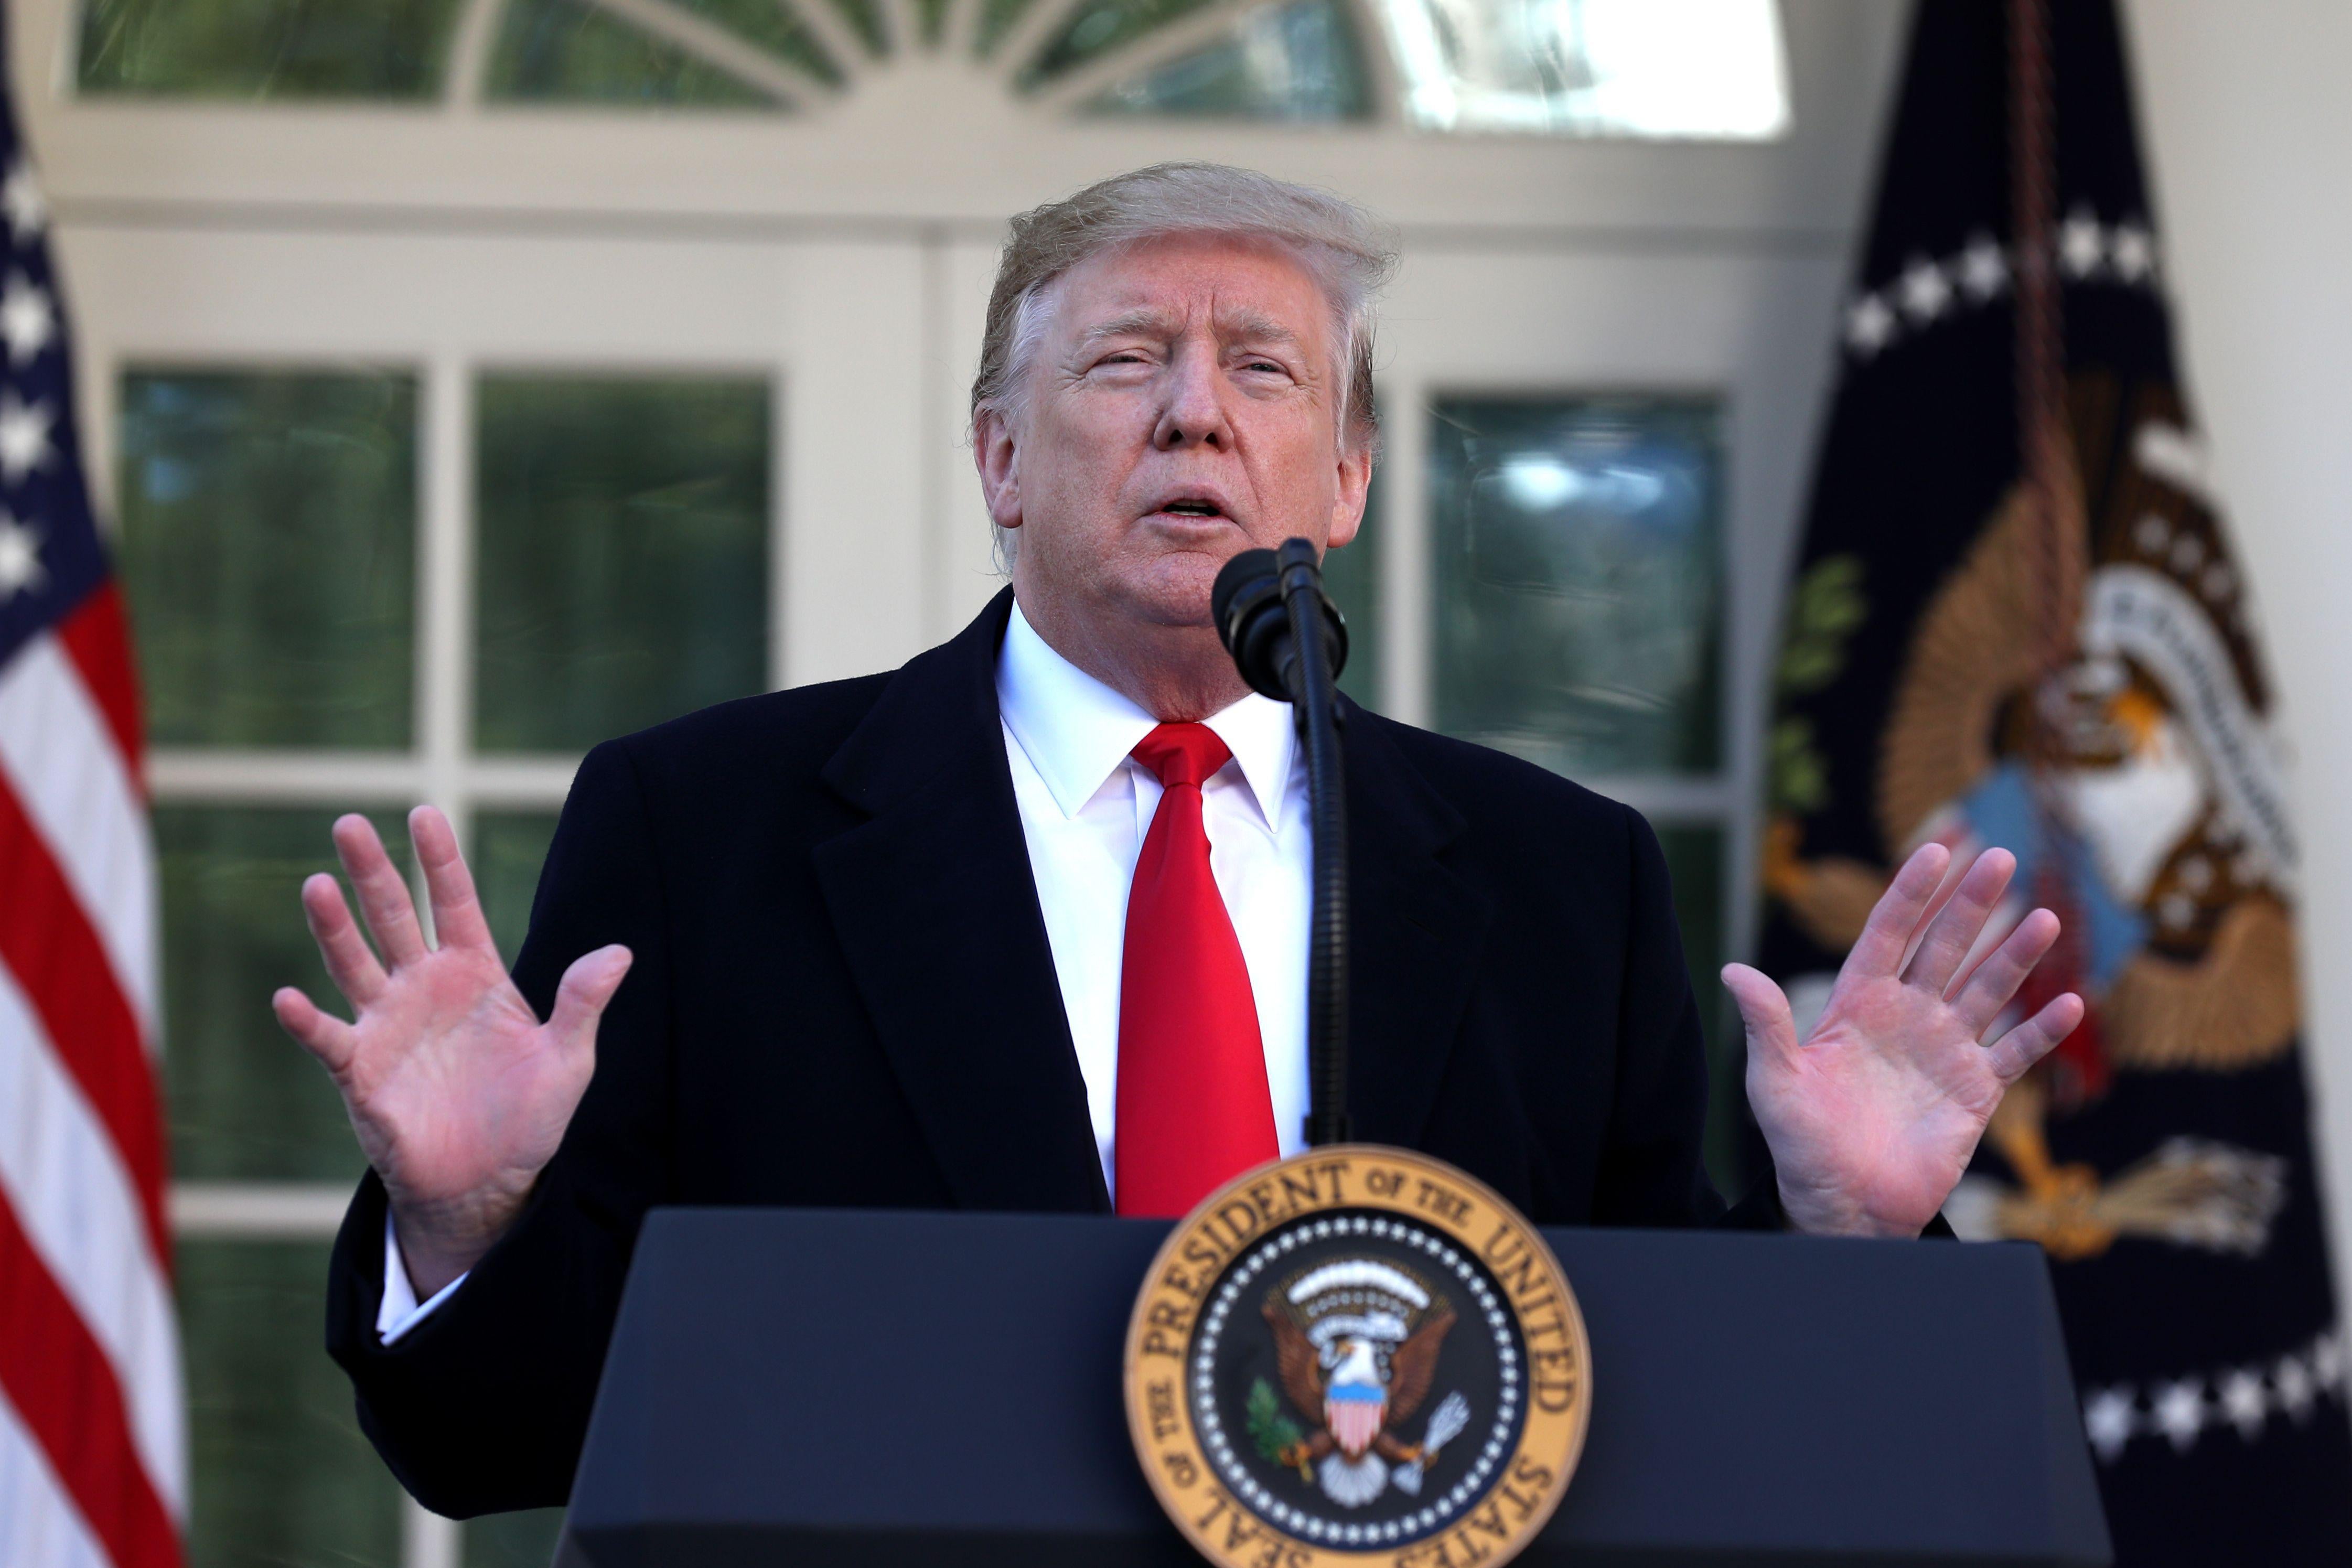 Donald Trump speaks about the government shutdown on January 25, 2019, from the Rose Garden of the White House.